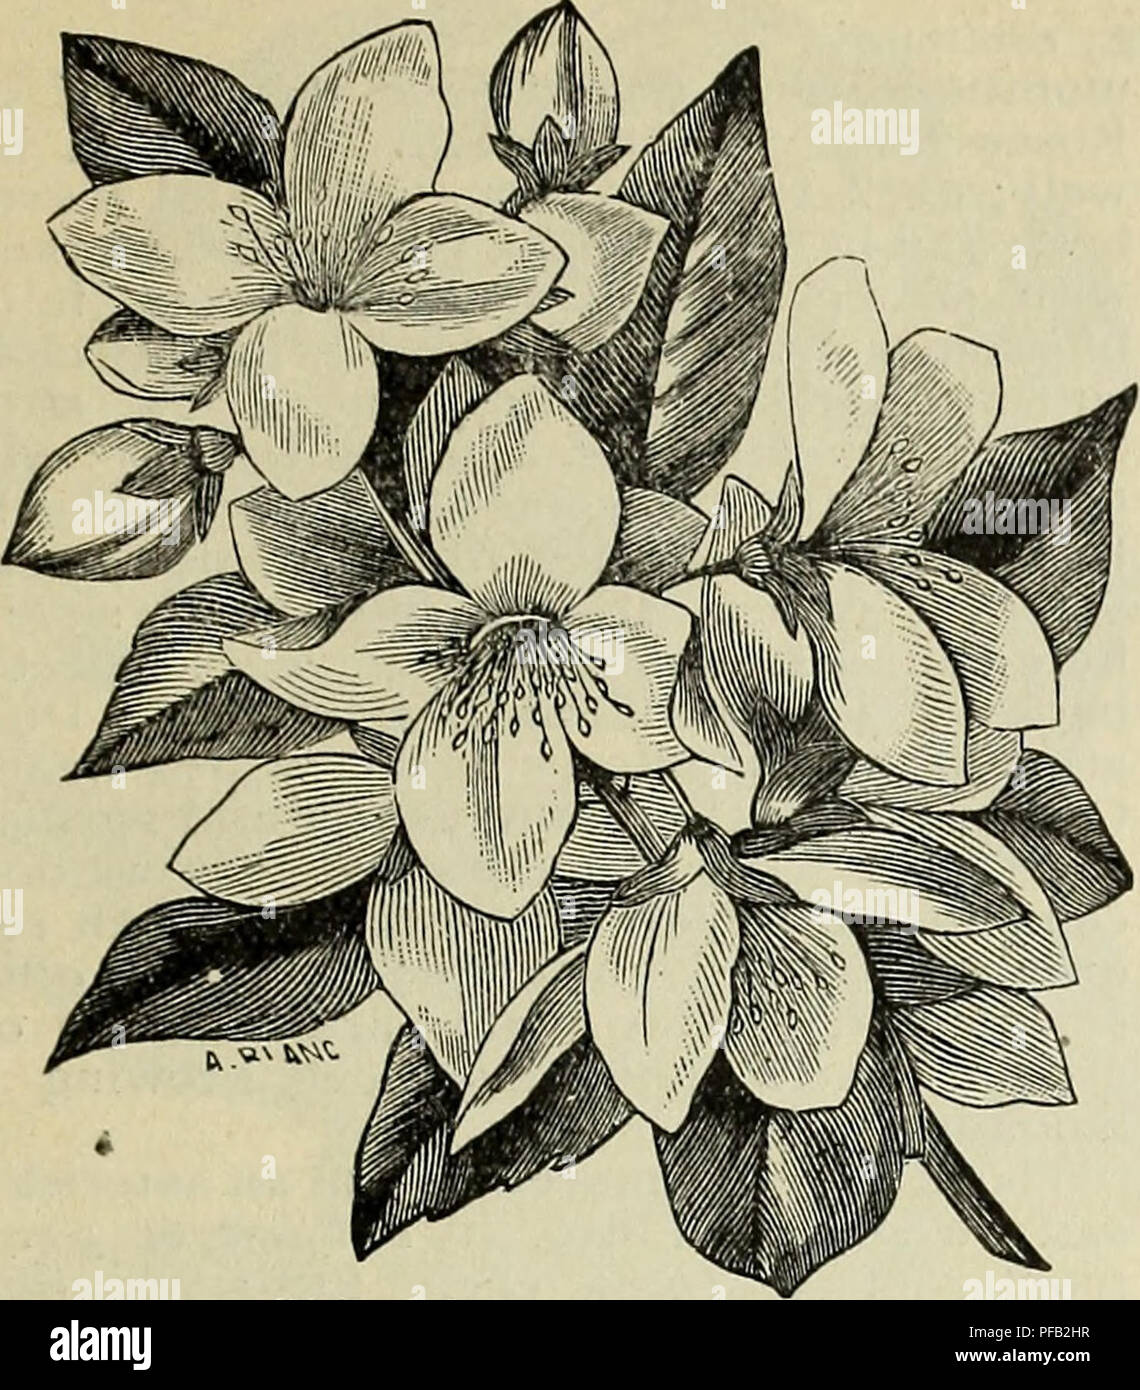 . Descriptive and illustrated catalogue of Royal Palm Nurseries. Nurseries (Horticulture) Florida Catalogs; Tropical plants Catalogs; Fruit trees Seedlings Catalogs; Citrus fruit industry Catalogs; Fruit Catalogs; Plants, Ornamental Catalogs. 59. Philadelphus coronariui PELTOPHORUM ferrugineum (Ccesalpinia). A small tree, nearly related to the species pro- ducing the basiletto wood. 75 cents each. PEDDIEA Africana. Natal. $1 each. PERIPLOCA Graeca. Grecian Silk Vine. Hardy climber, with purple flowers ; rapid grower. 25 cents each. PERSEA Carolinensis. Red Bay, Bull Bay. A handsome native broa Stock Photo